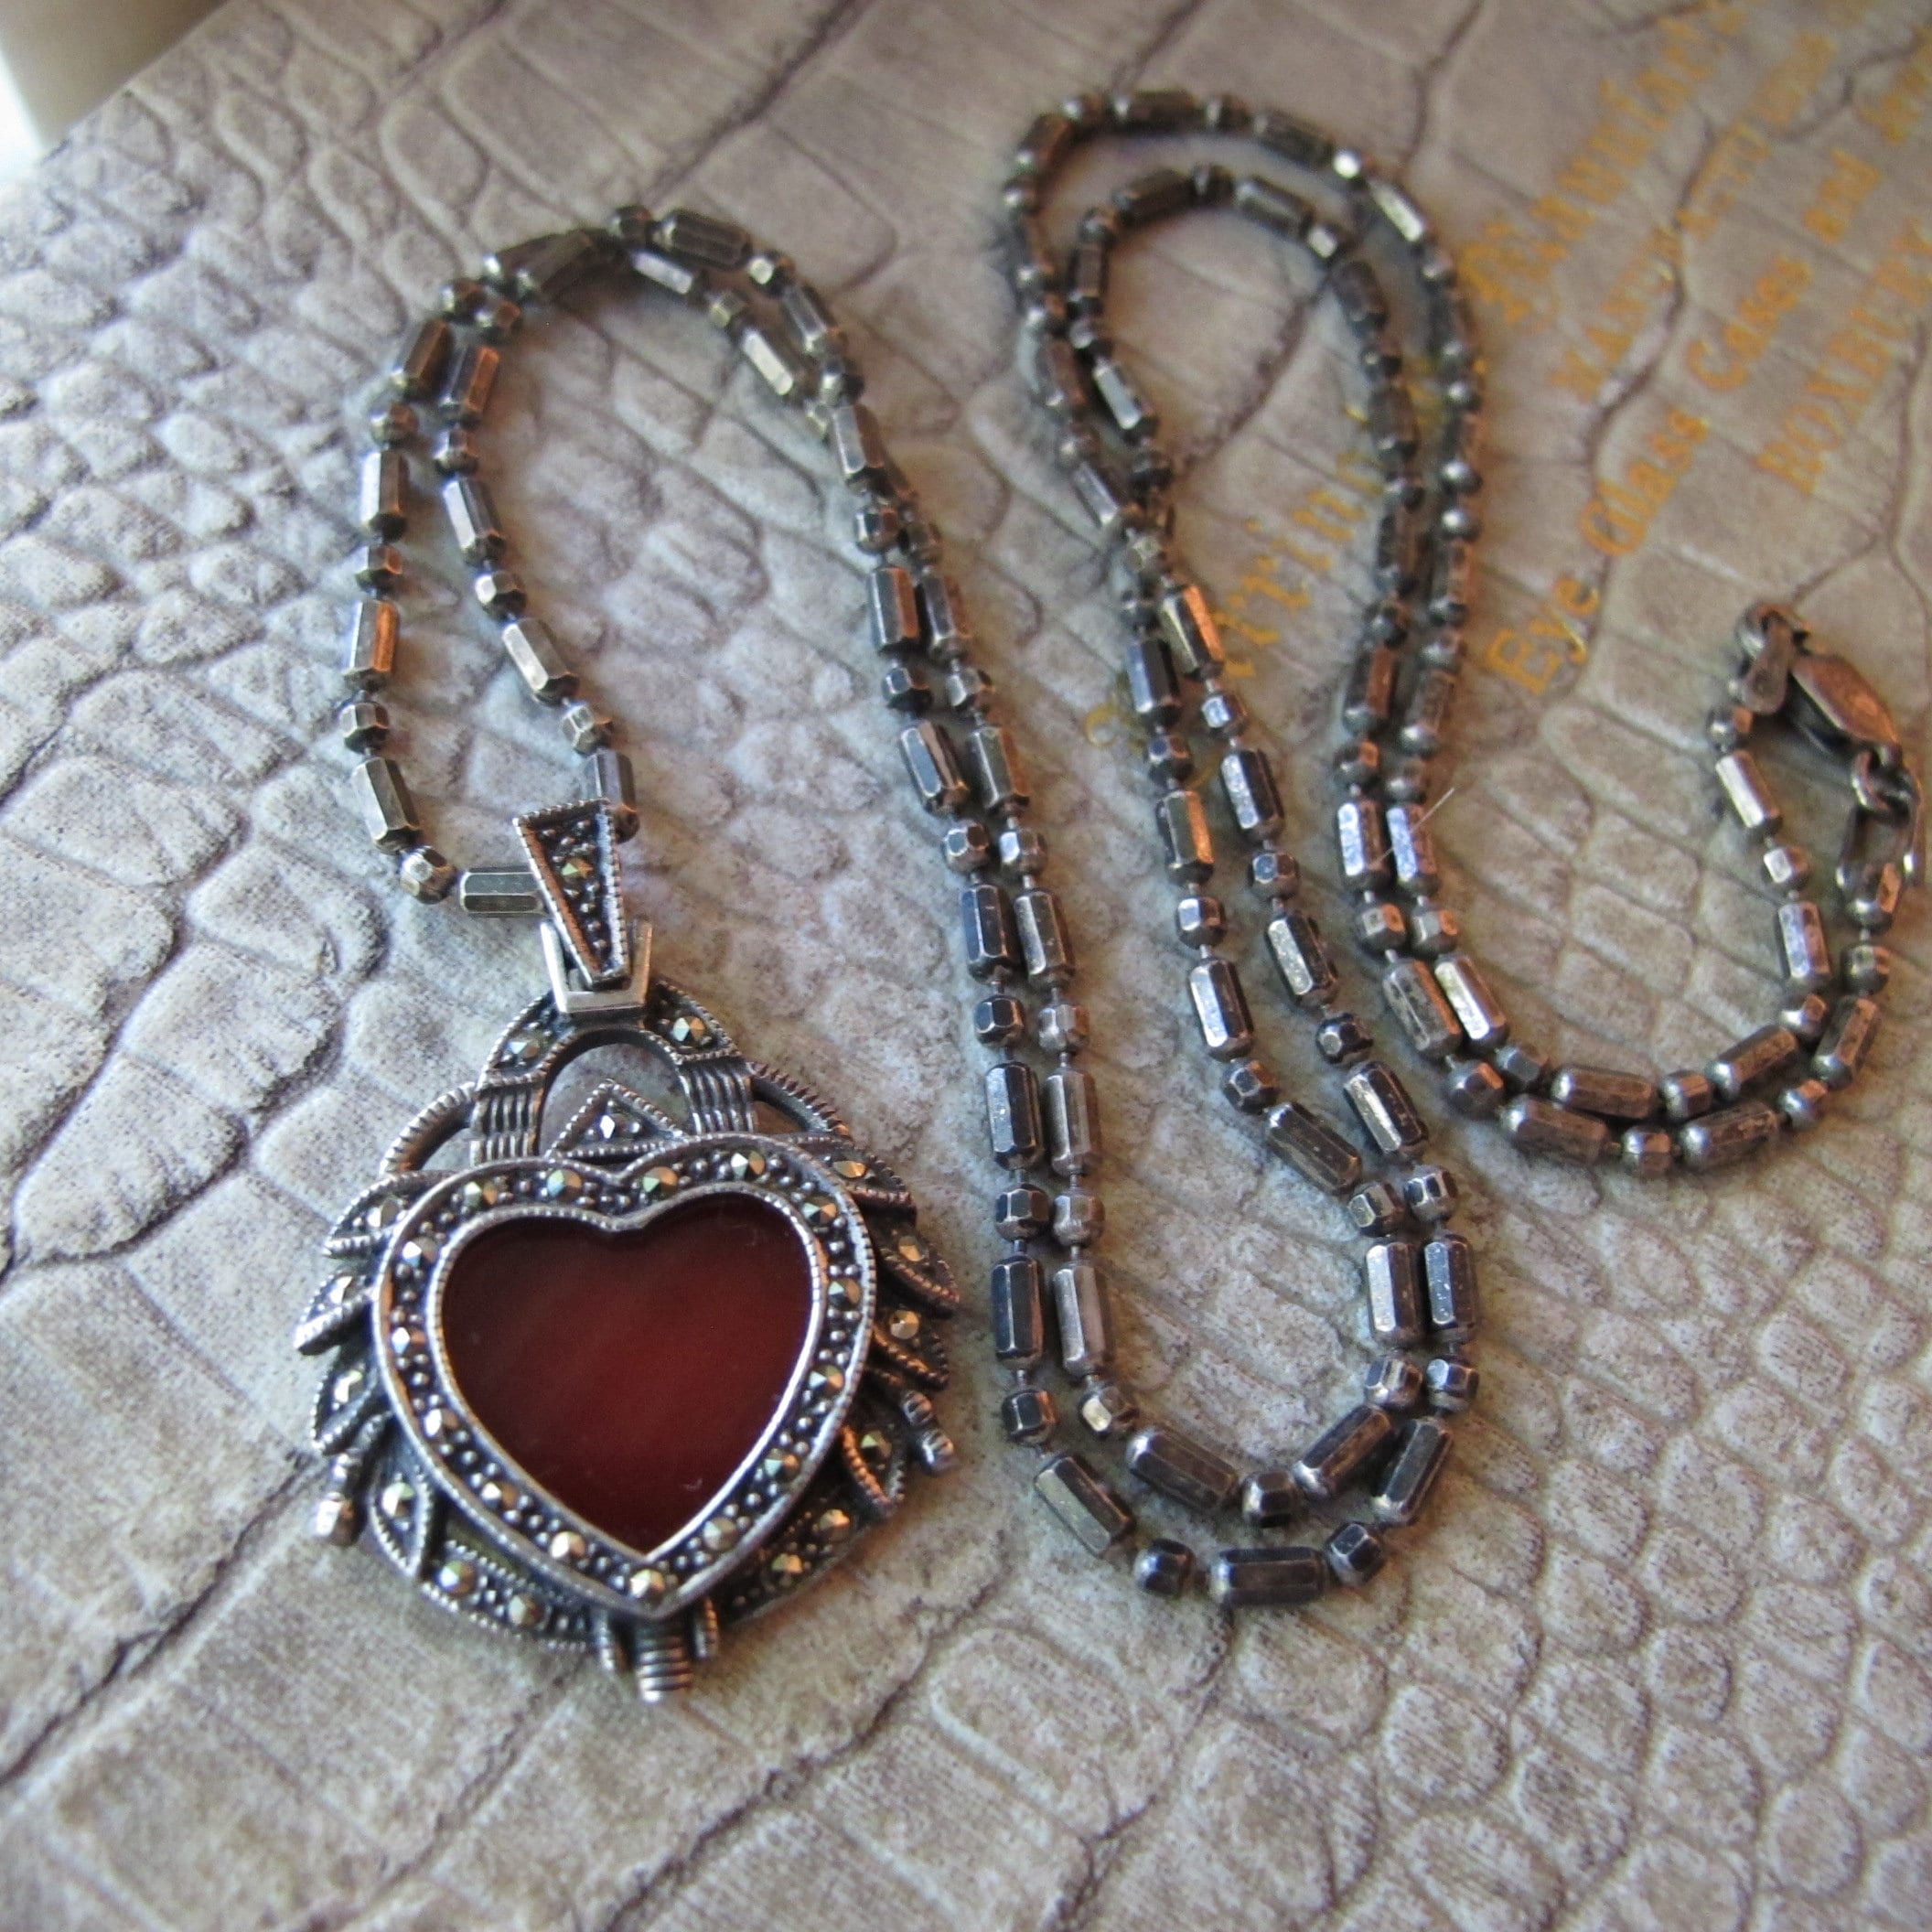 Sterling Silver Marcasite and Crystal Heart Pendant on Black Cord Necklace